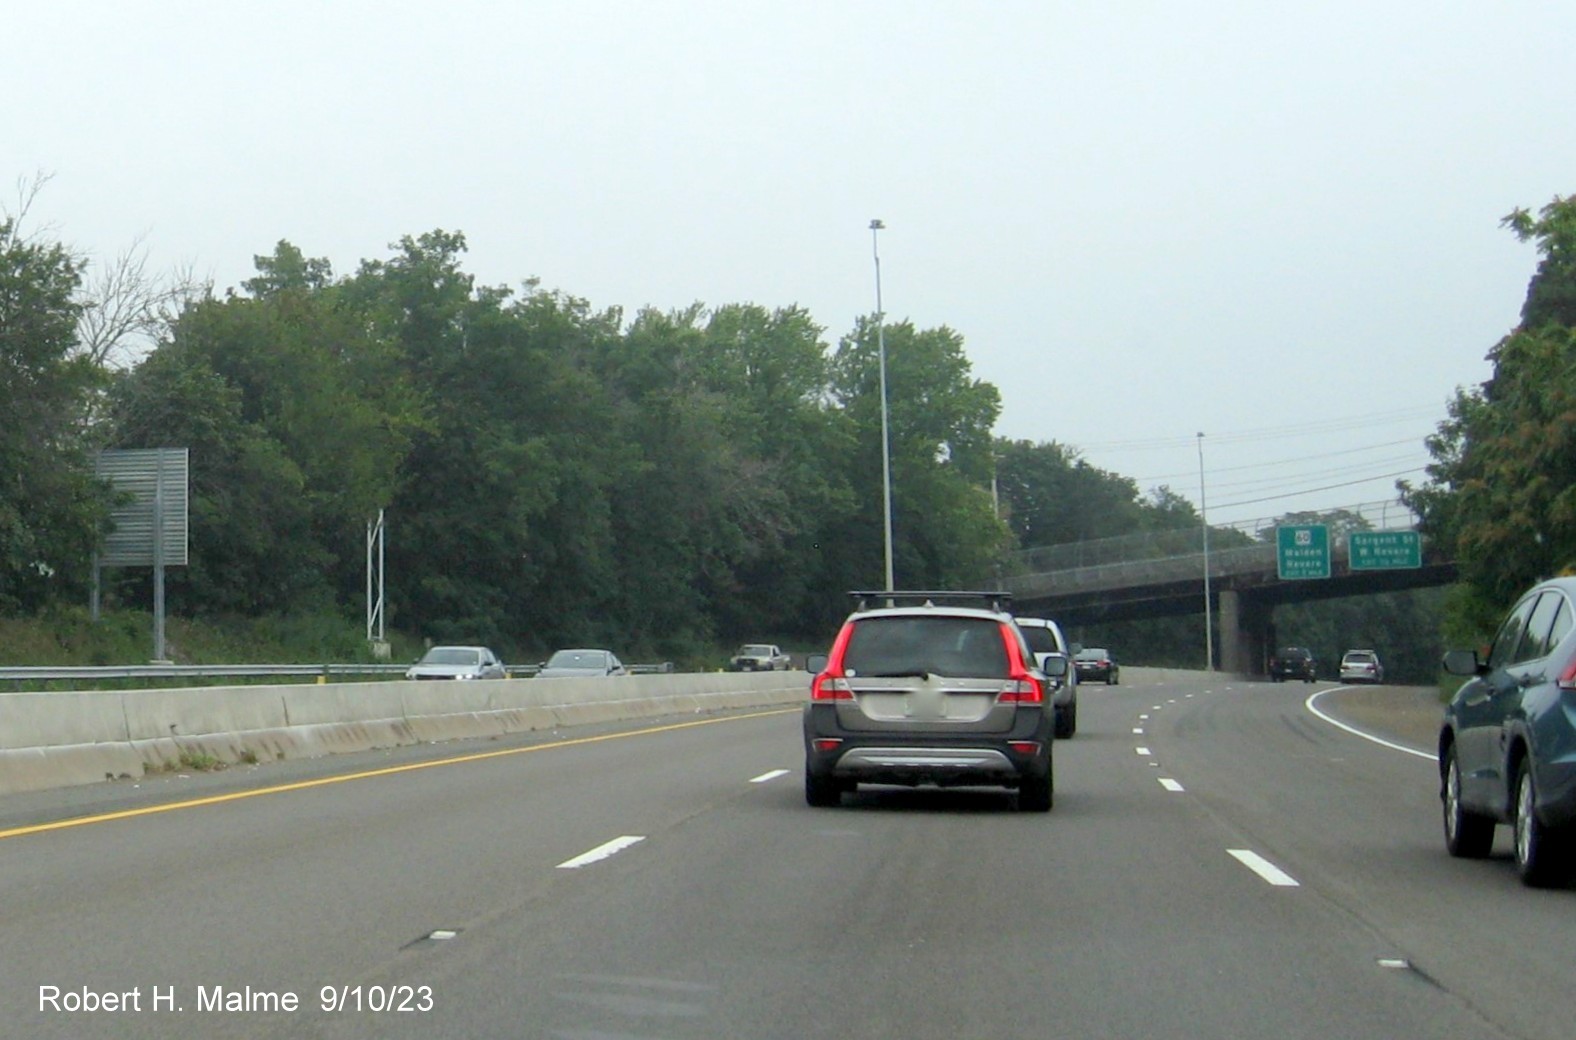 Image of new overhead sign support for the MA 16 exit on US 1/Northeast Expressway South in Revere, September 2023